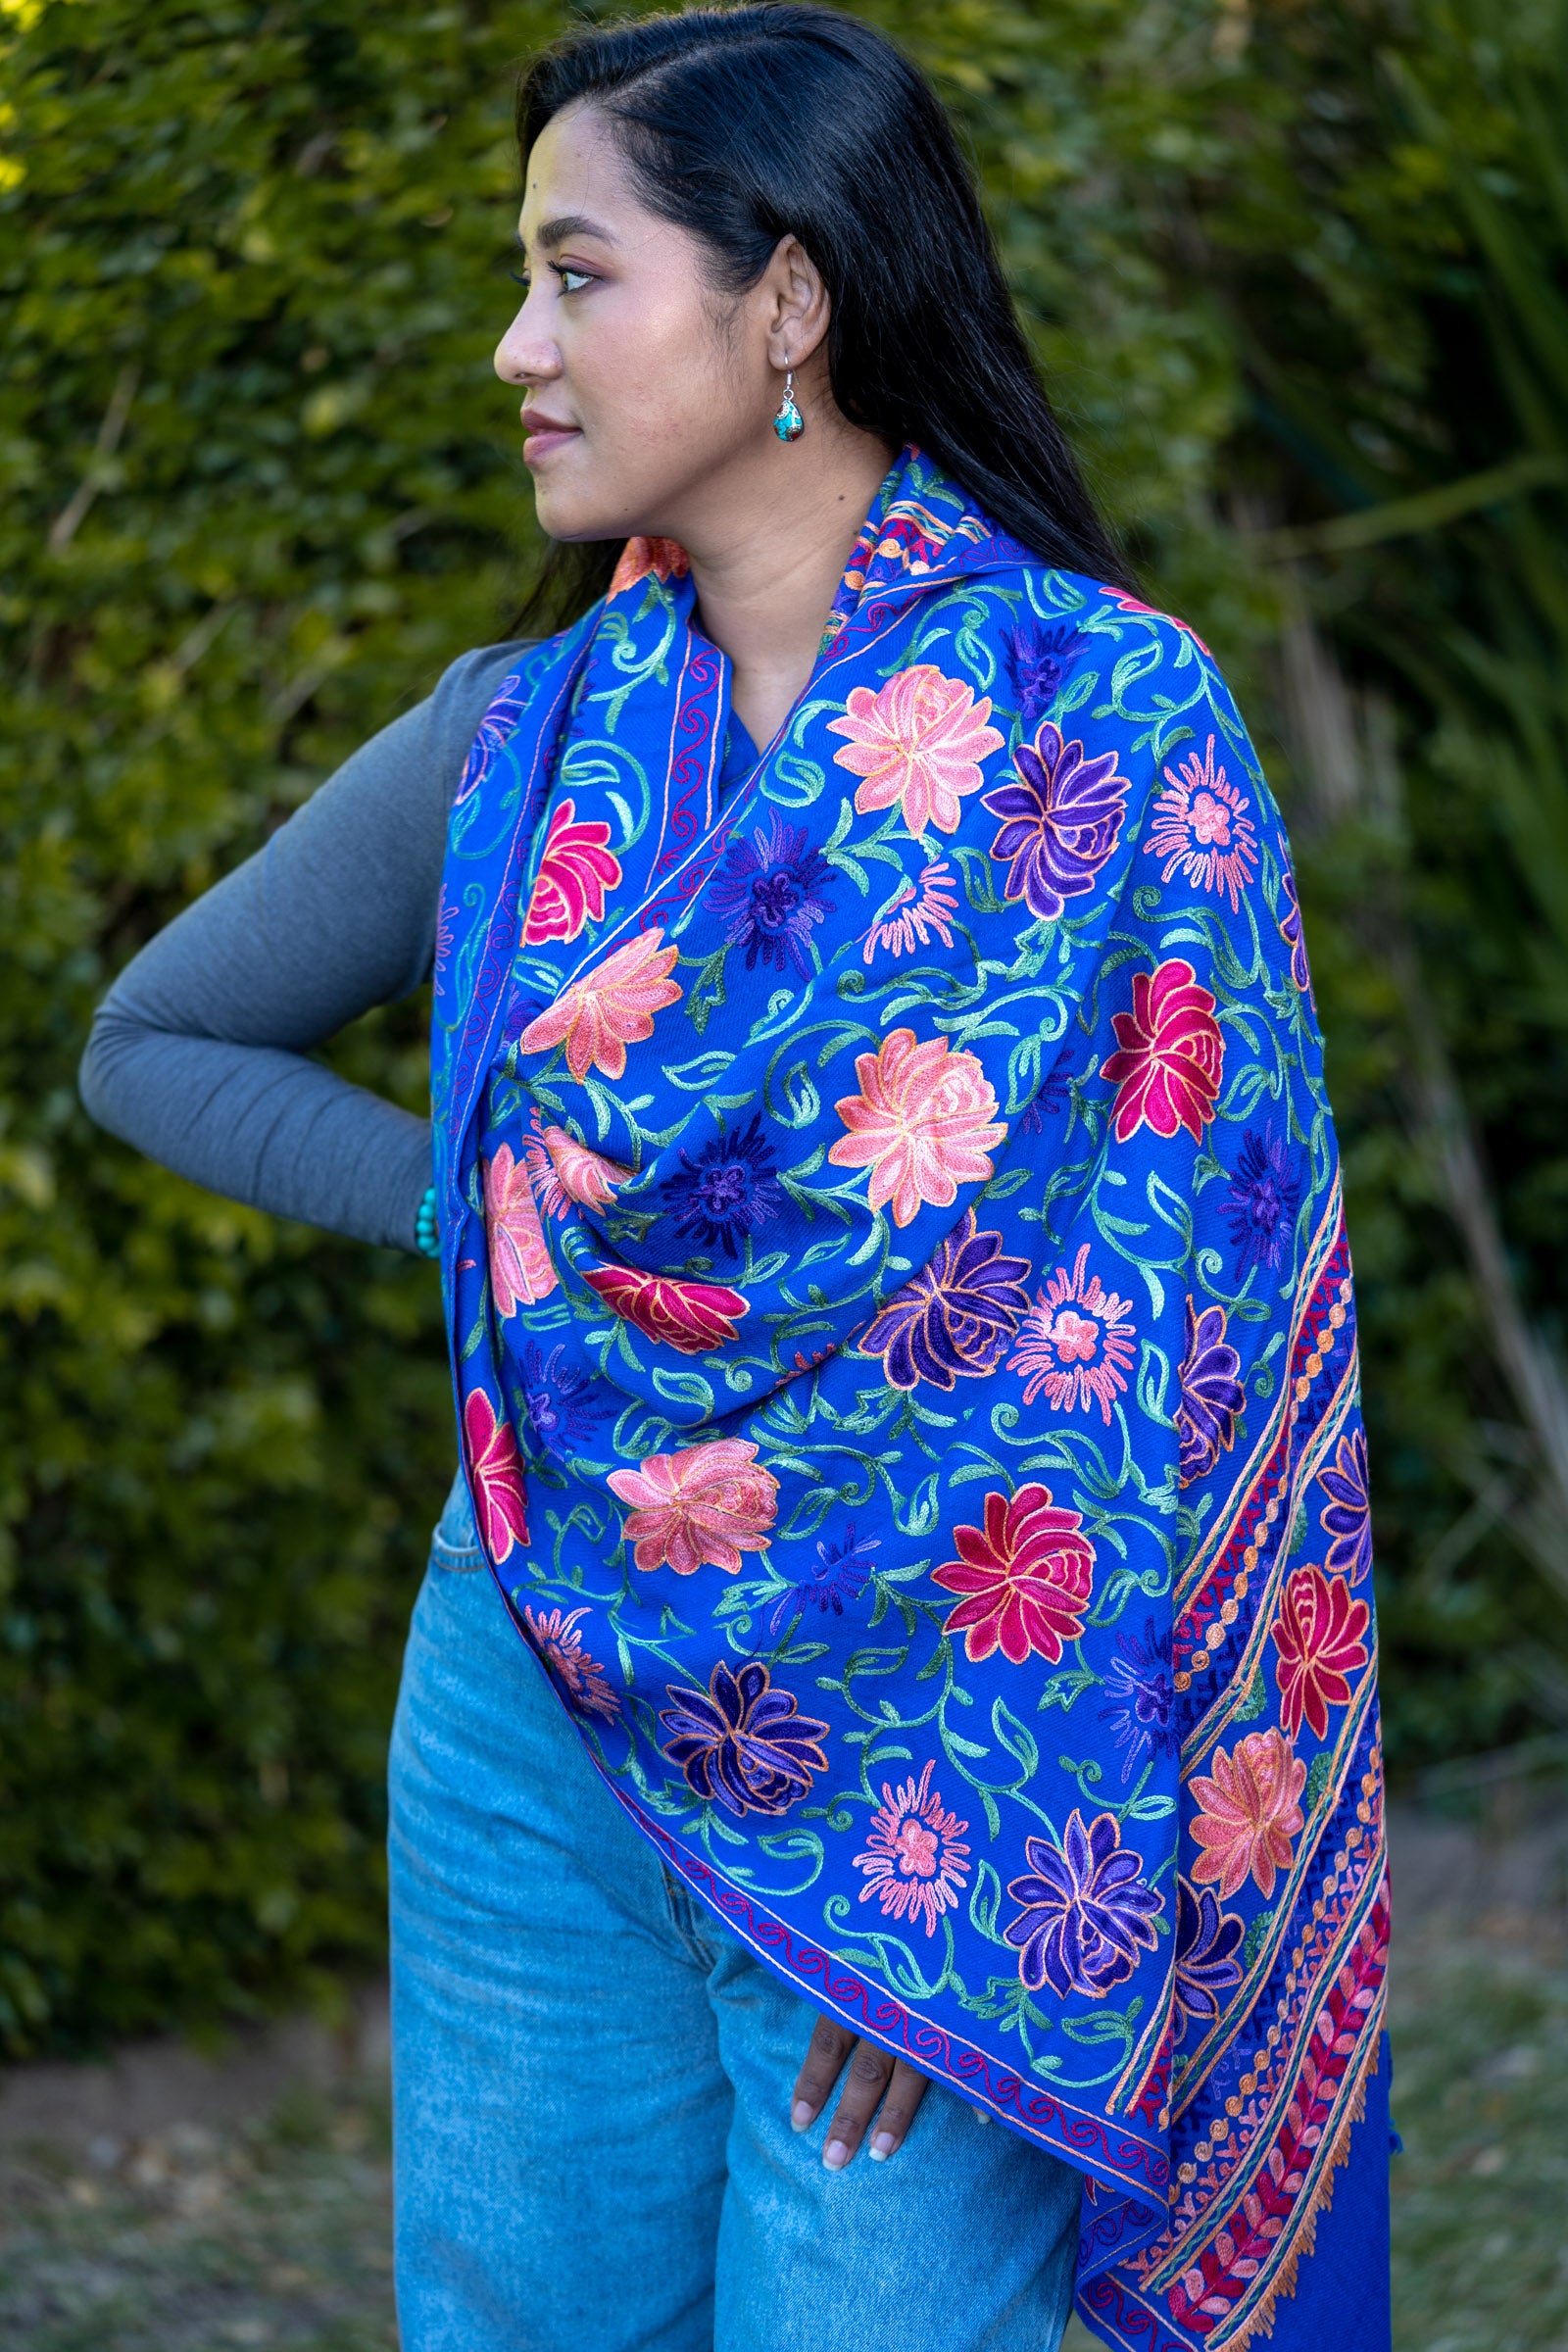 Floral Pattern Pashmina Shawl for everyday wear.